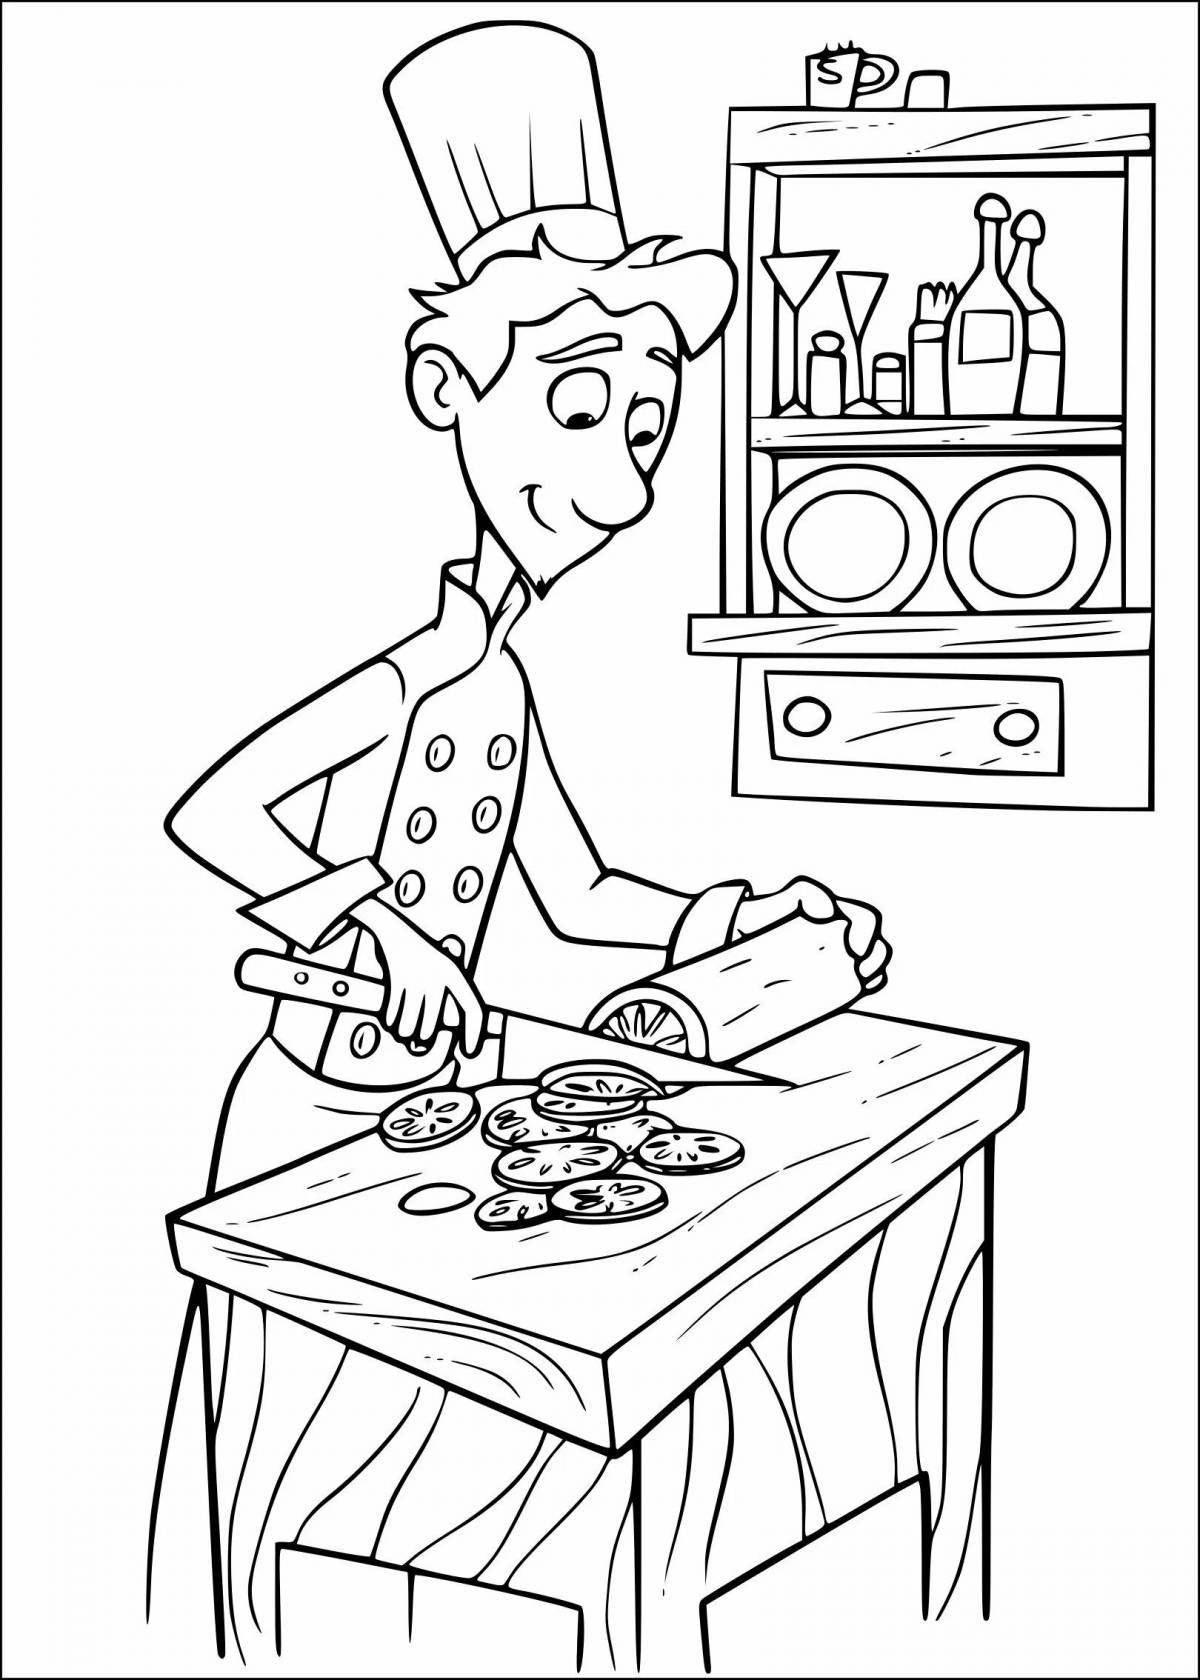 Attractive cooking coloring book